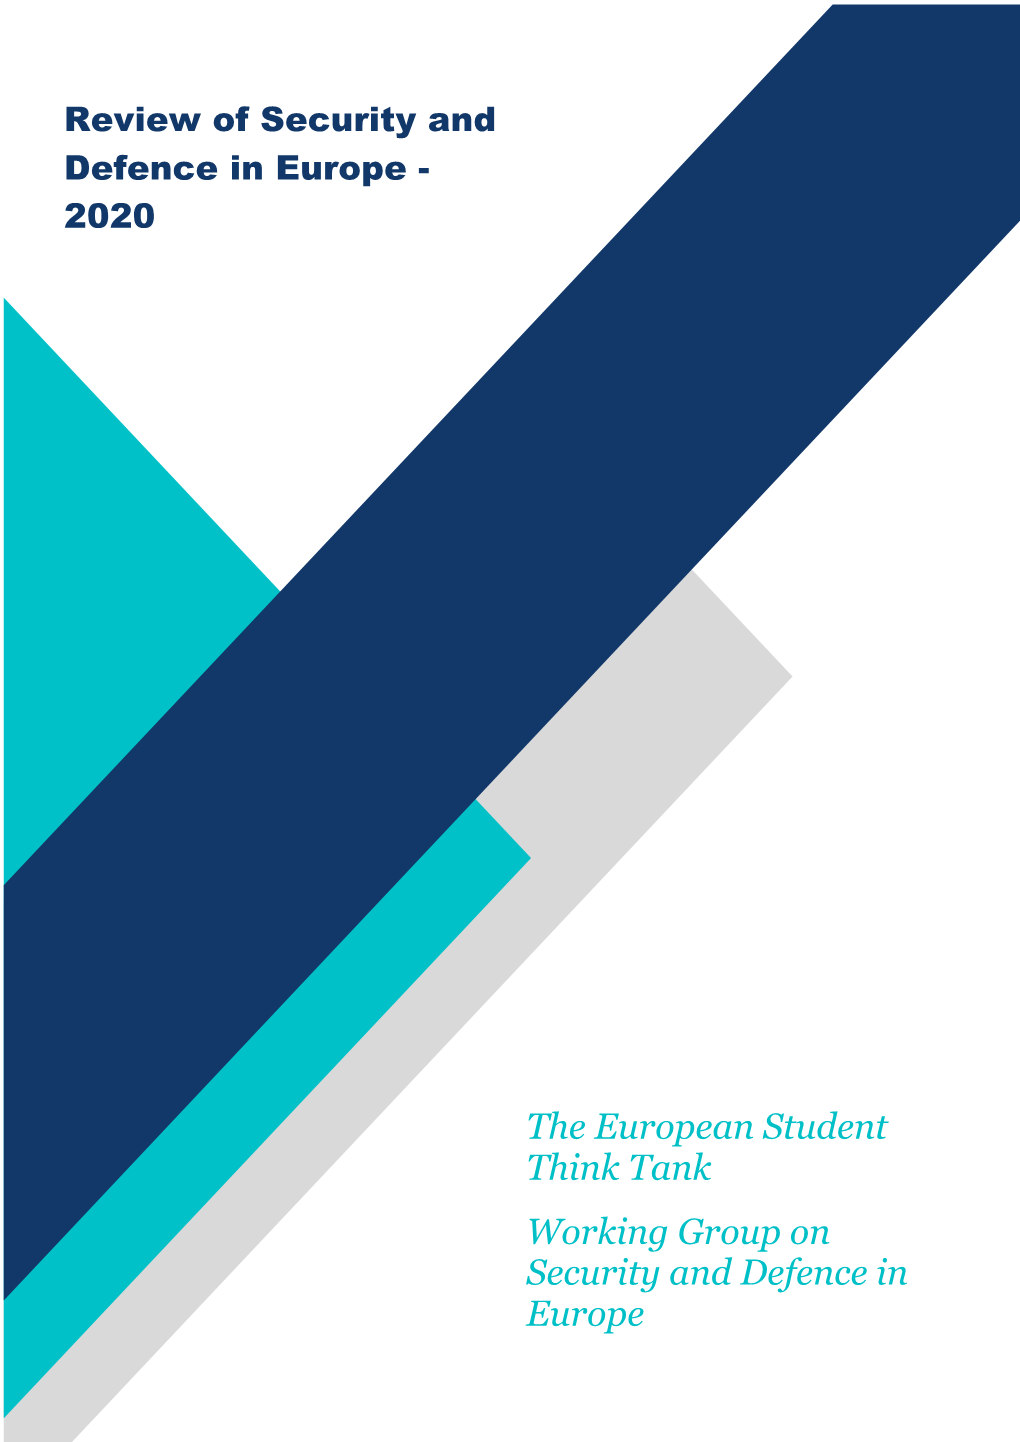 The European Student Think Tank Working Group on Security And